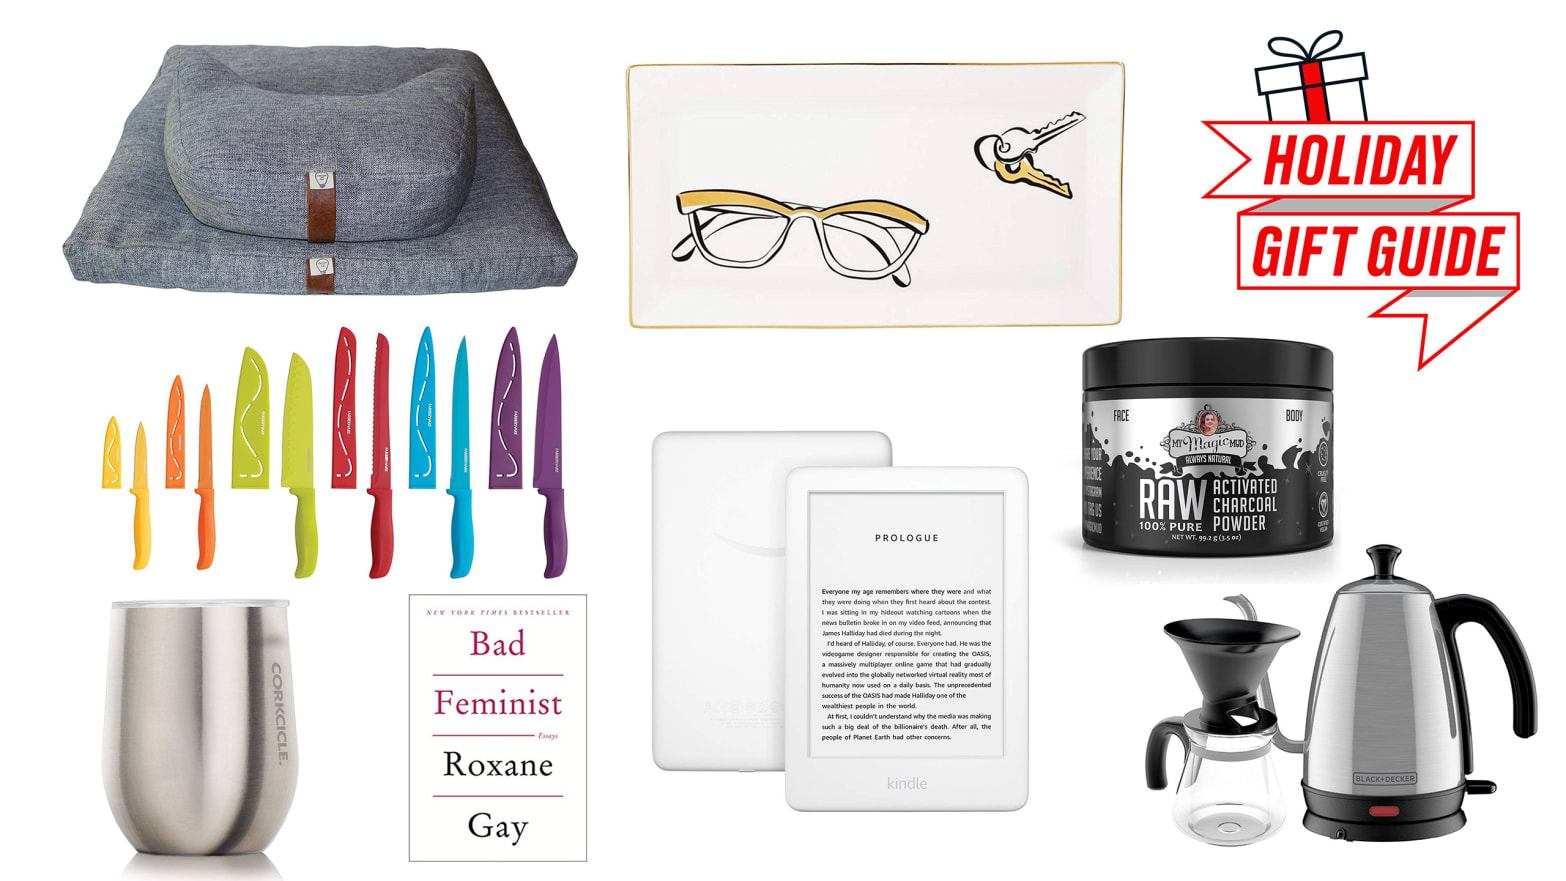 Gifts for Mom Who Doesn't Want Anything: Unique Gift Ideas for Mom